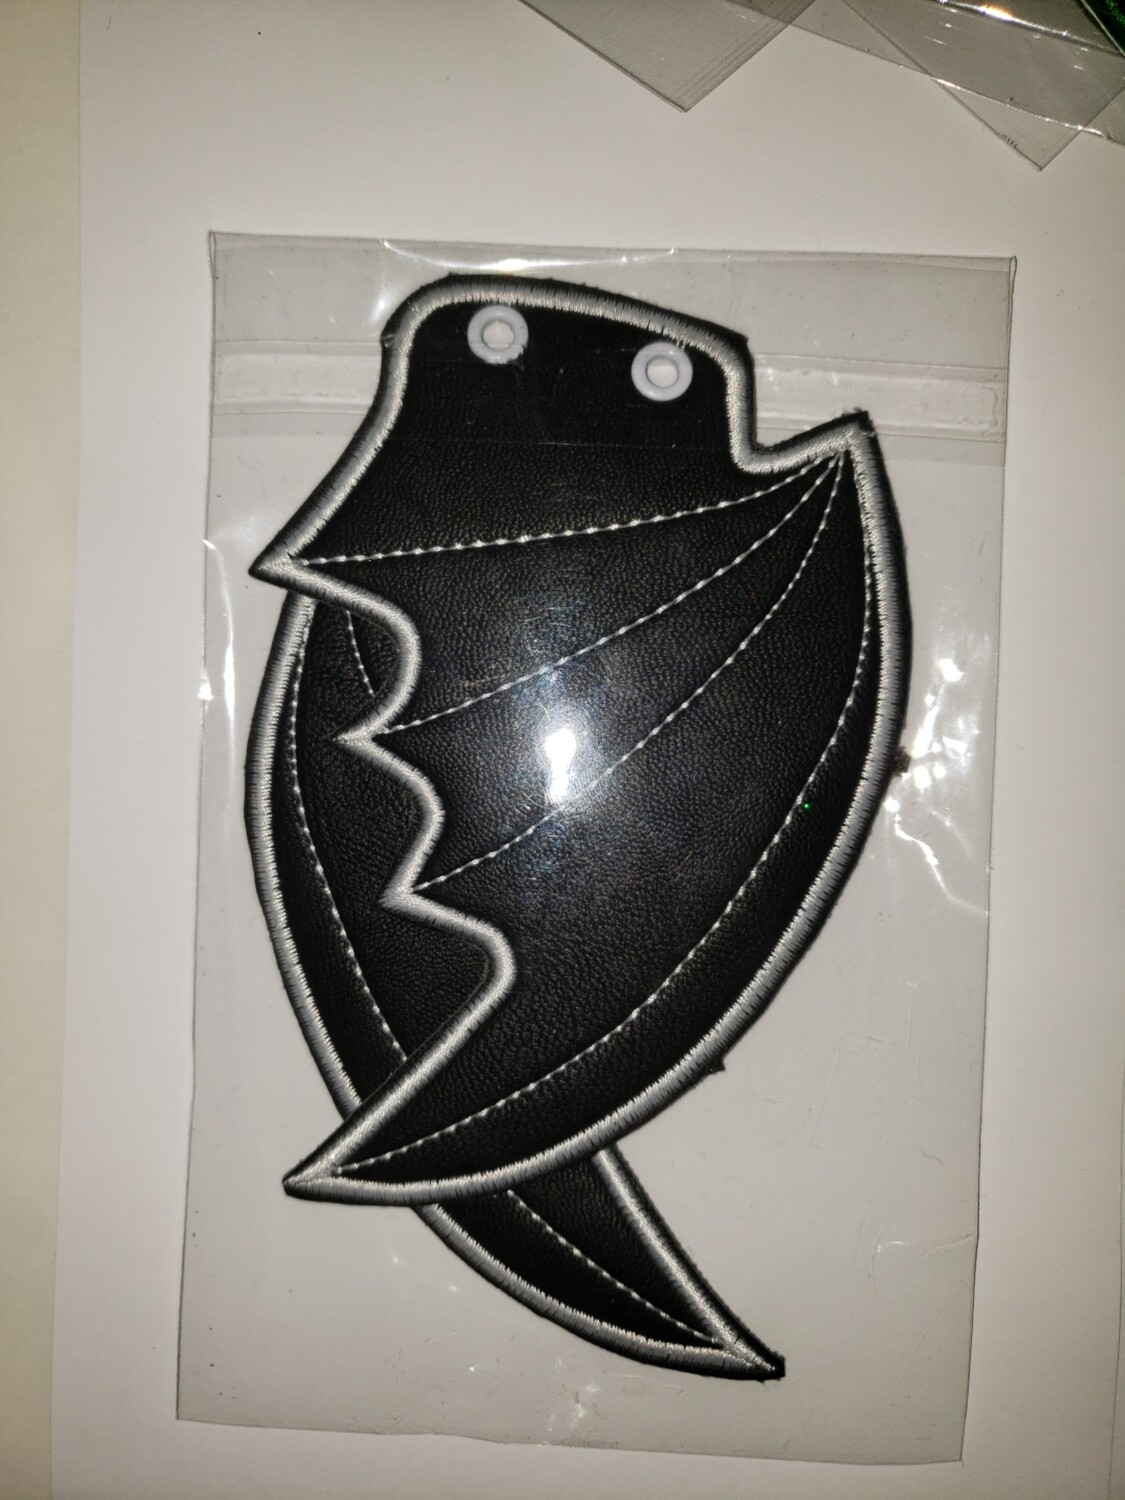 Bat skate wings in black with white stitching